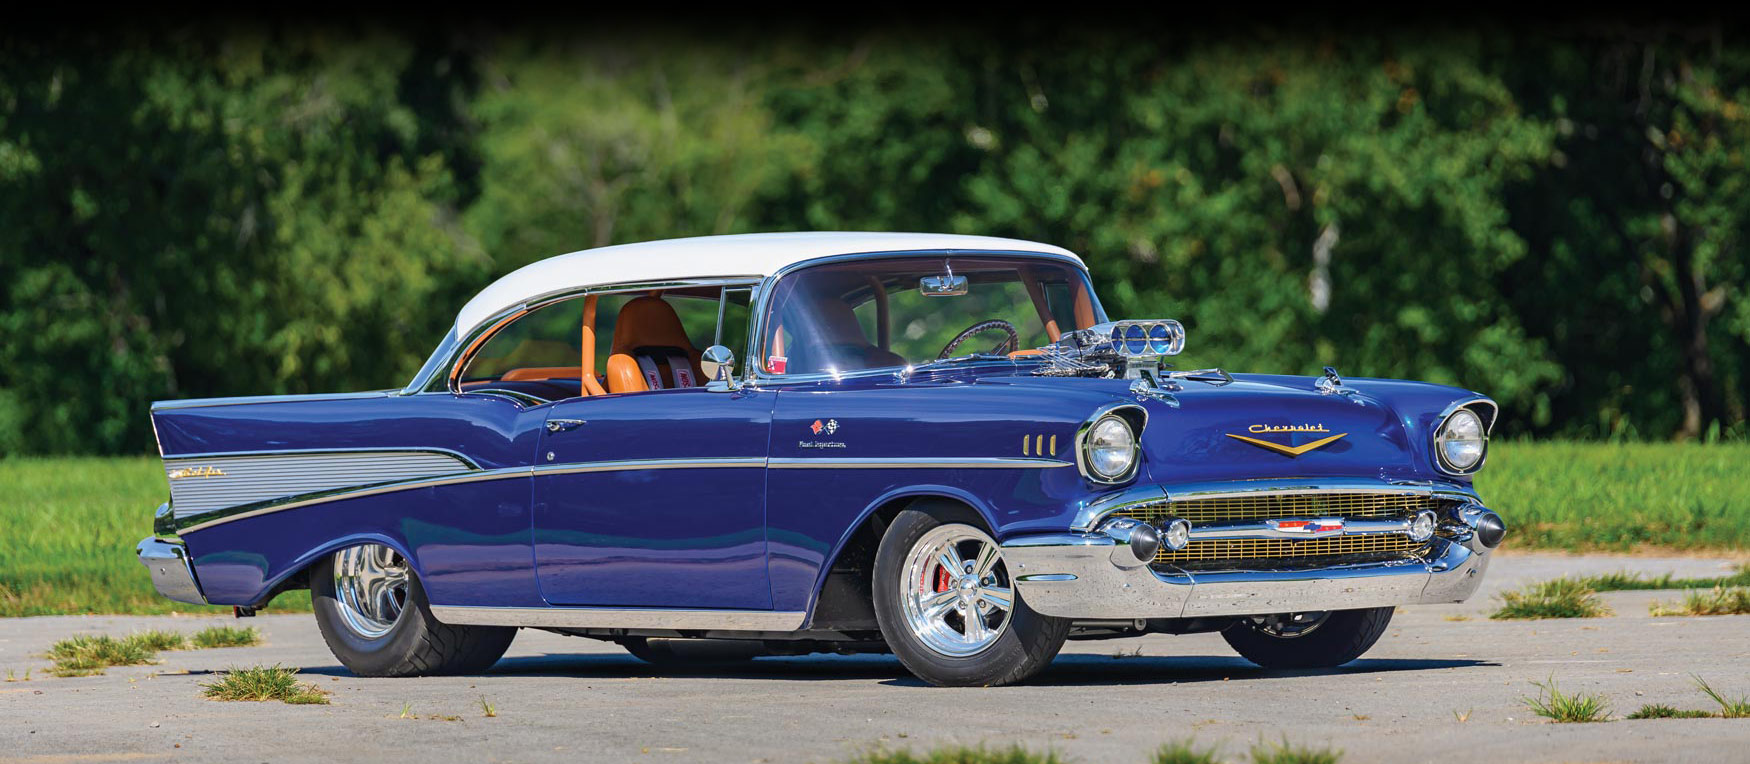 blue '57 bel air, white top, cognac interior, chrome grill and wheels